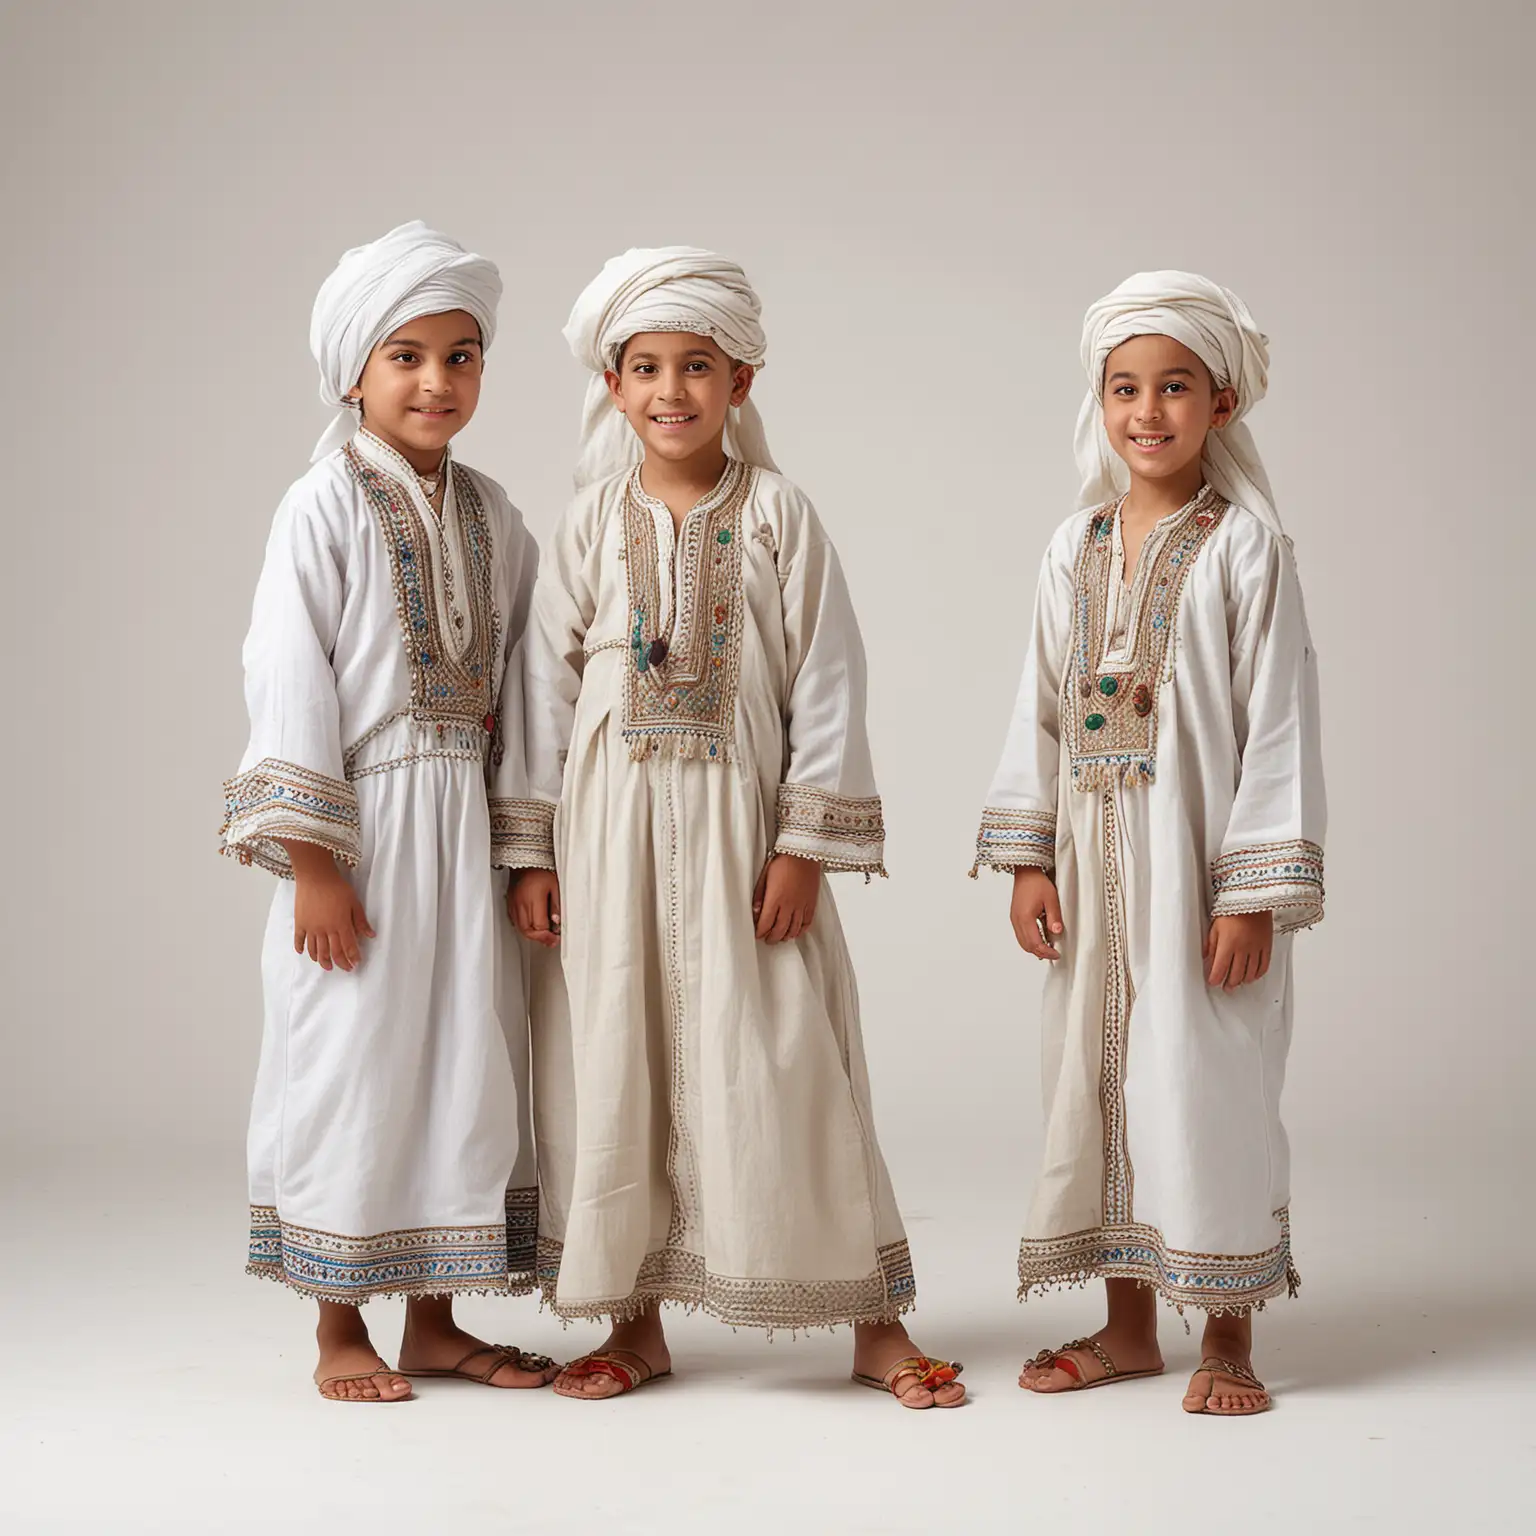 Three moroccan children in traditional clothes, playing, full standing figures, white neutral background